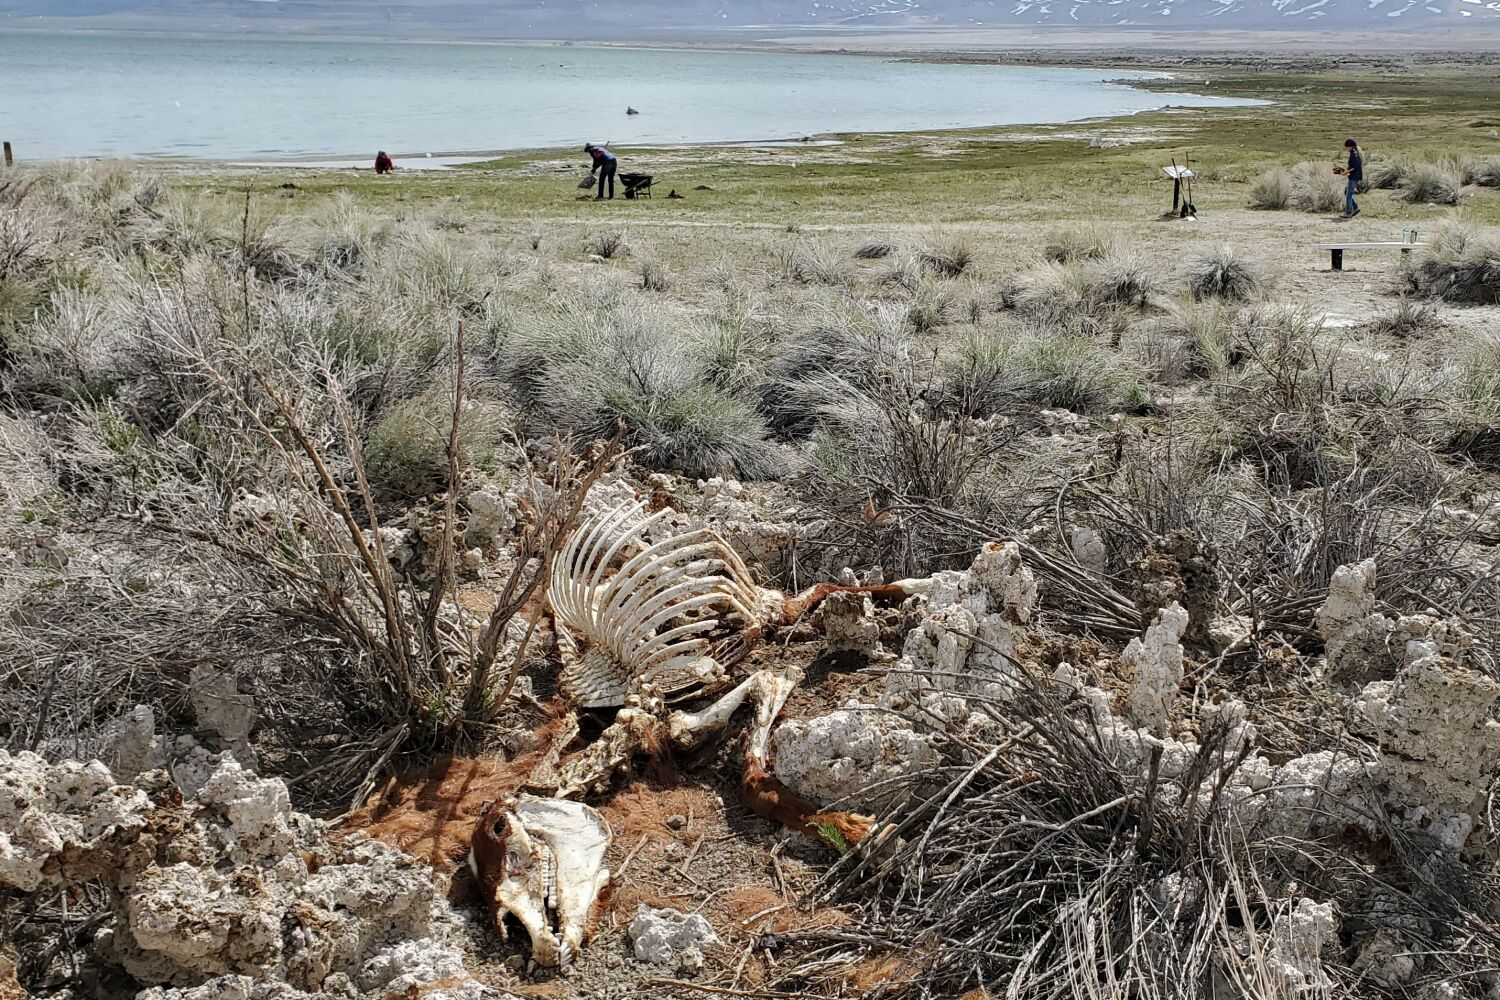 Wild horses spent the harsh winter at Mono Lake. Now they're turning up dead